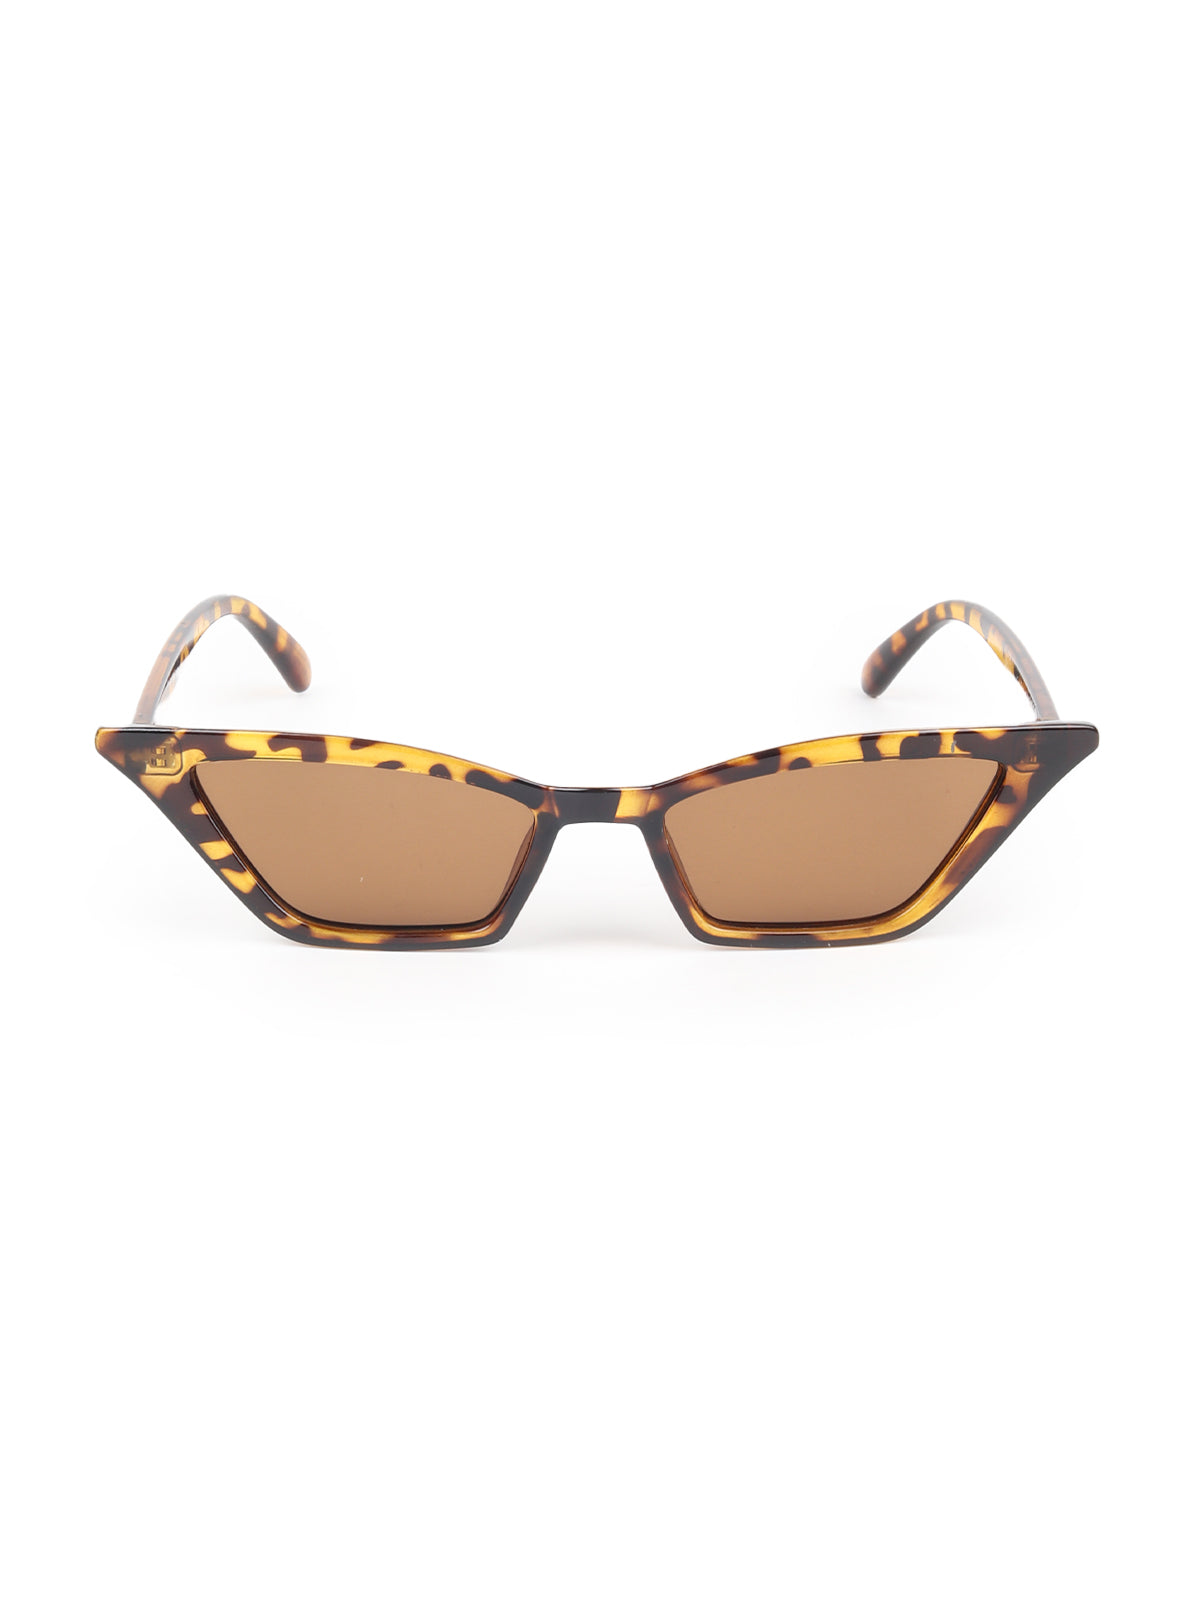 Odette Olive Acrylic Printed Cateye Sunglasses for Women